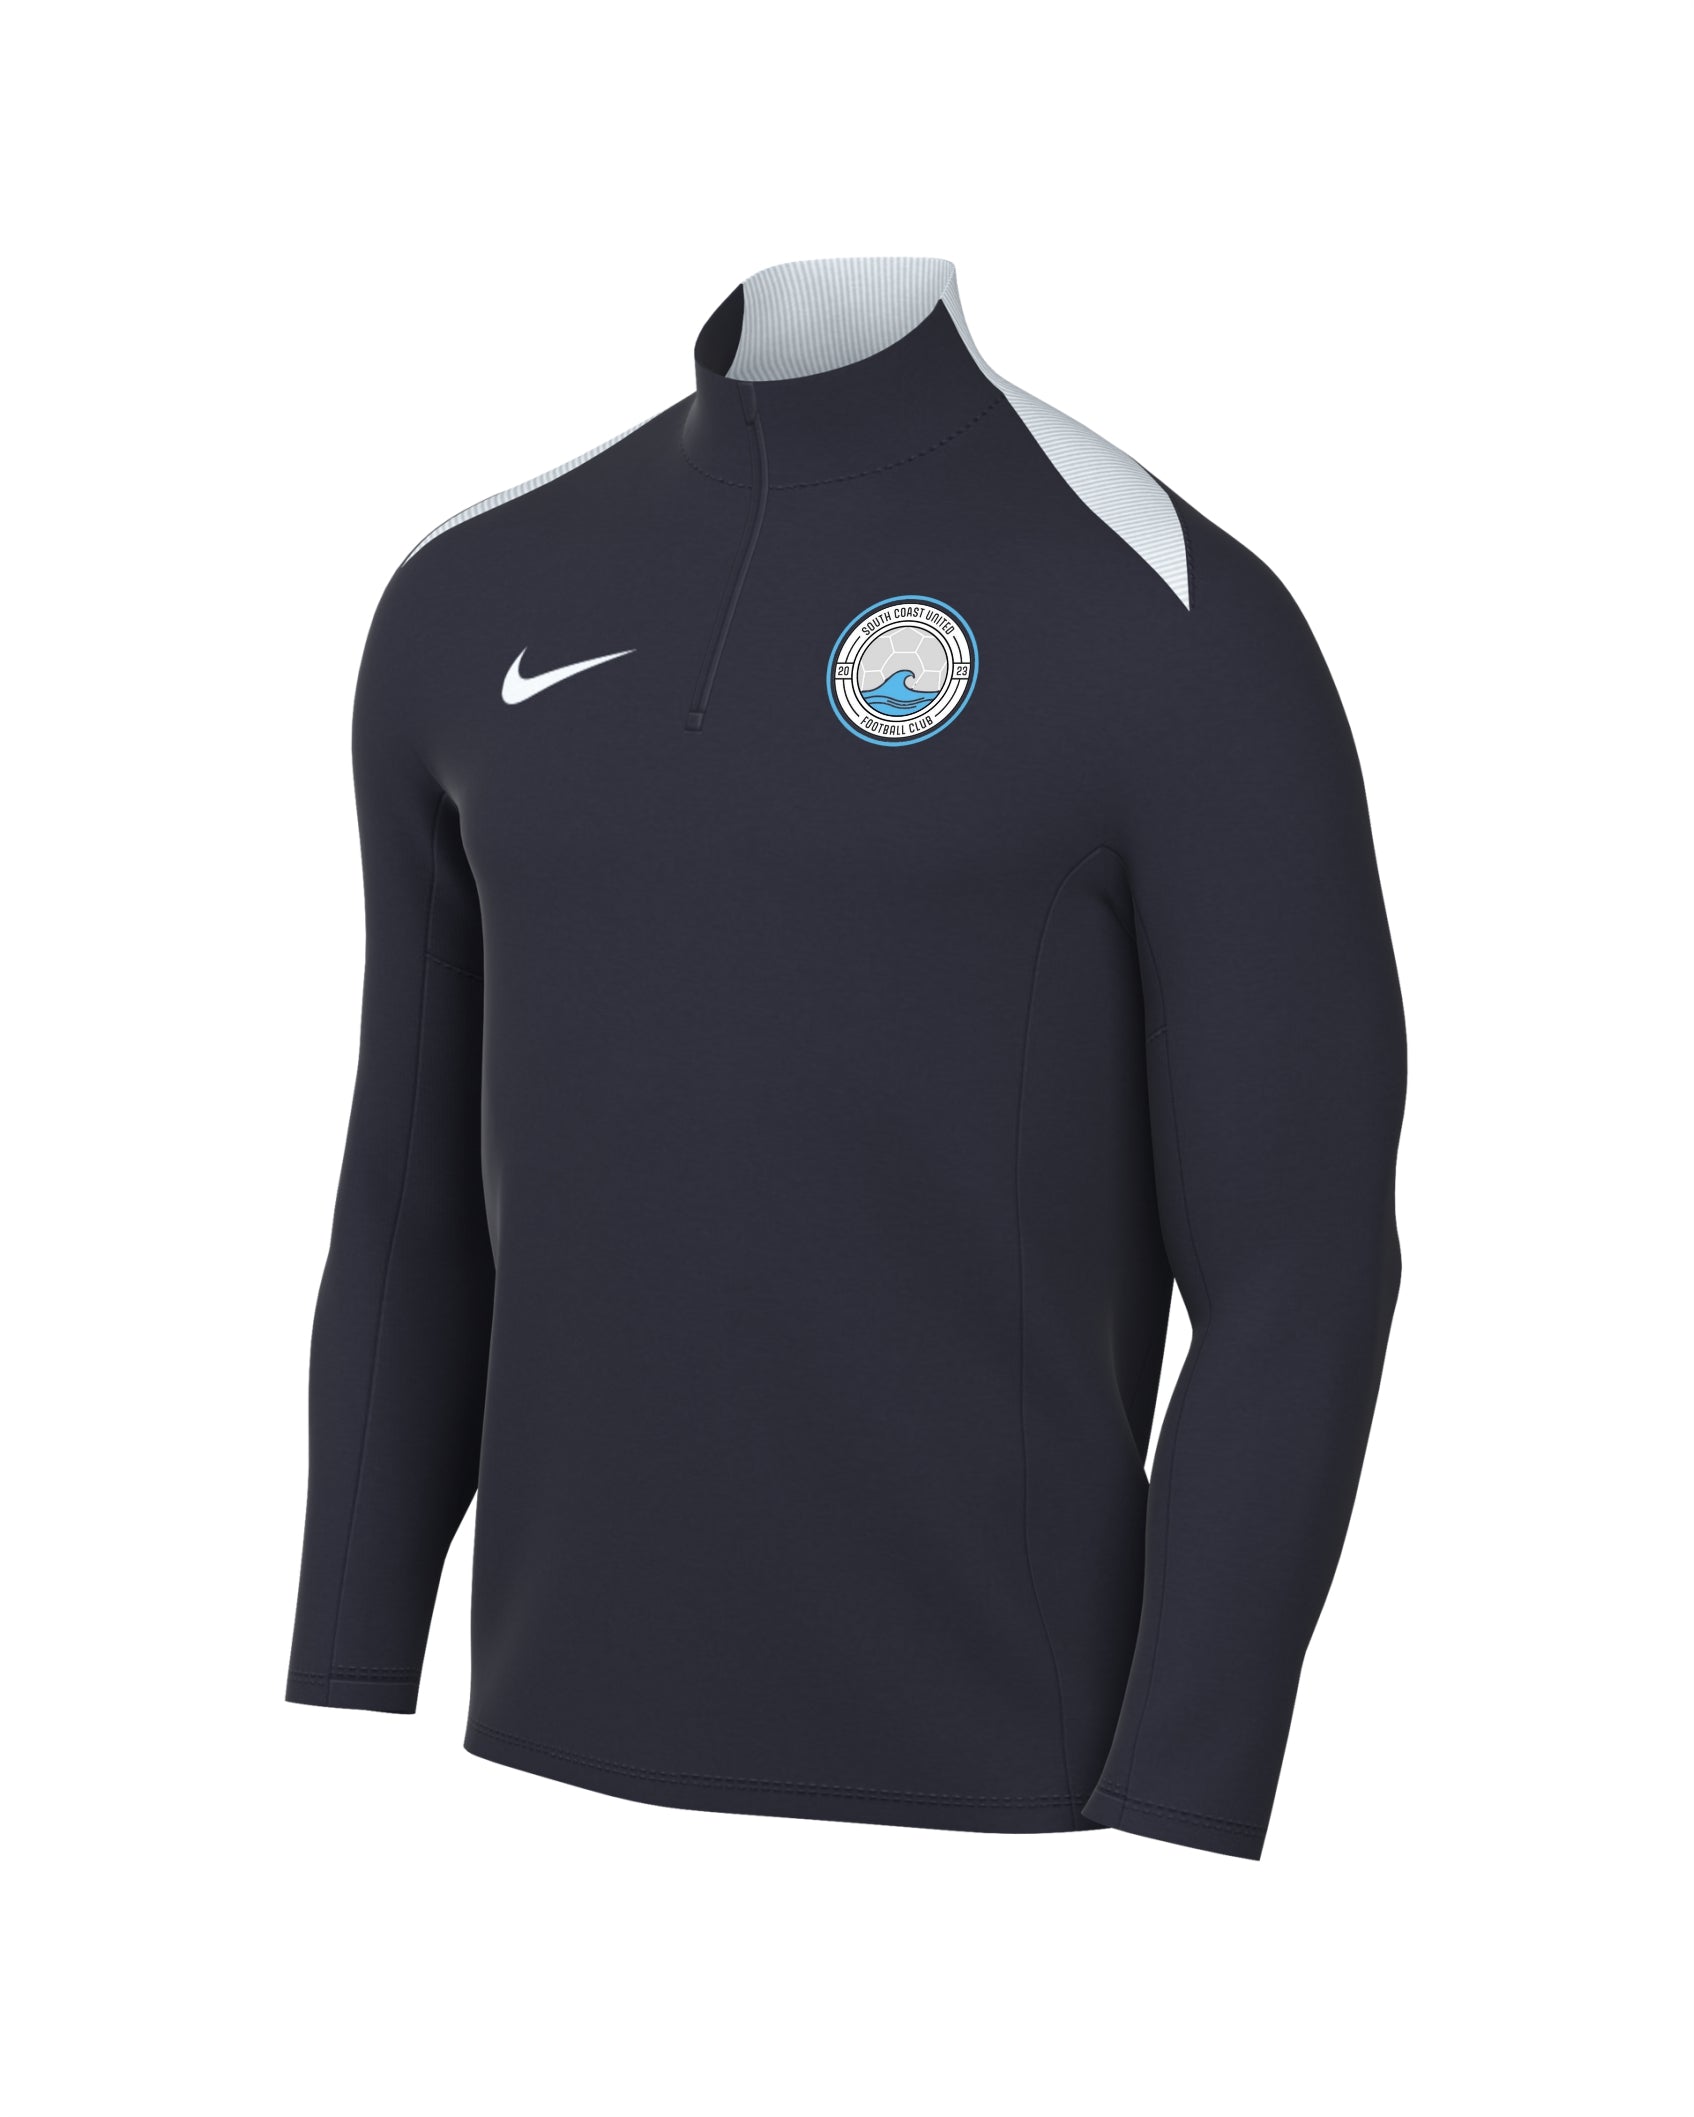 South Coast United - Nike Academy Pro 24 Drill Top